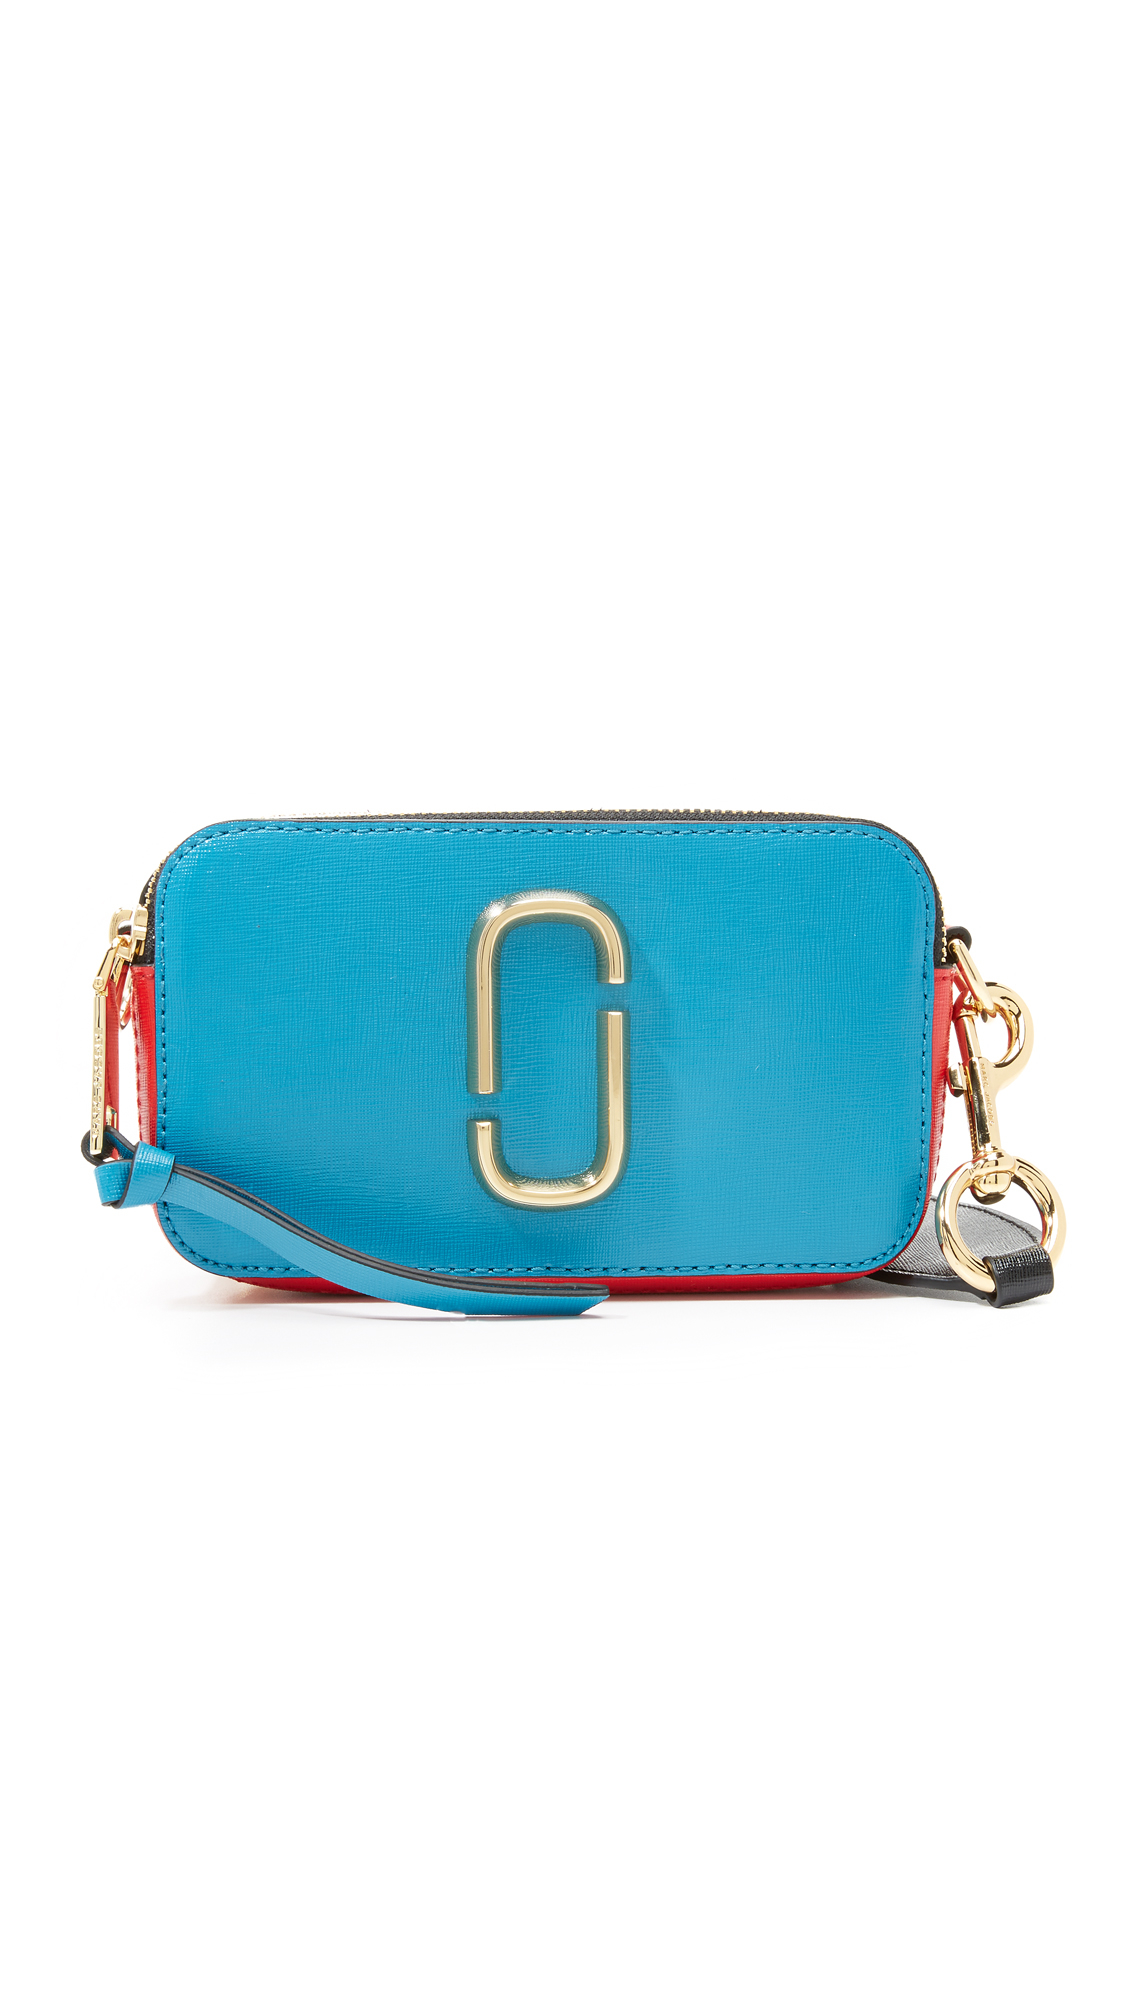 Lyst - Marc Jacobs Snapshot Colorblock Camera Bag in Blue